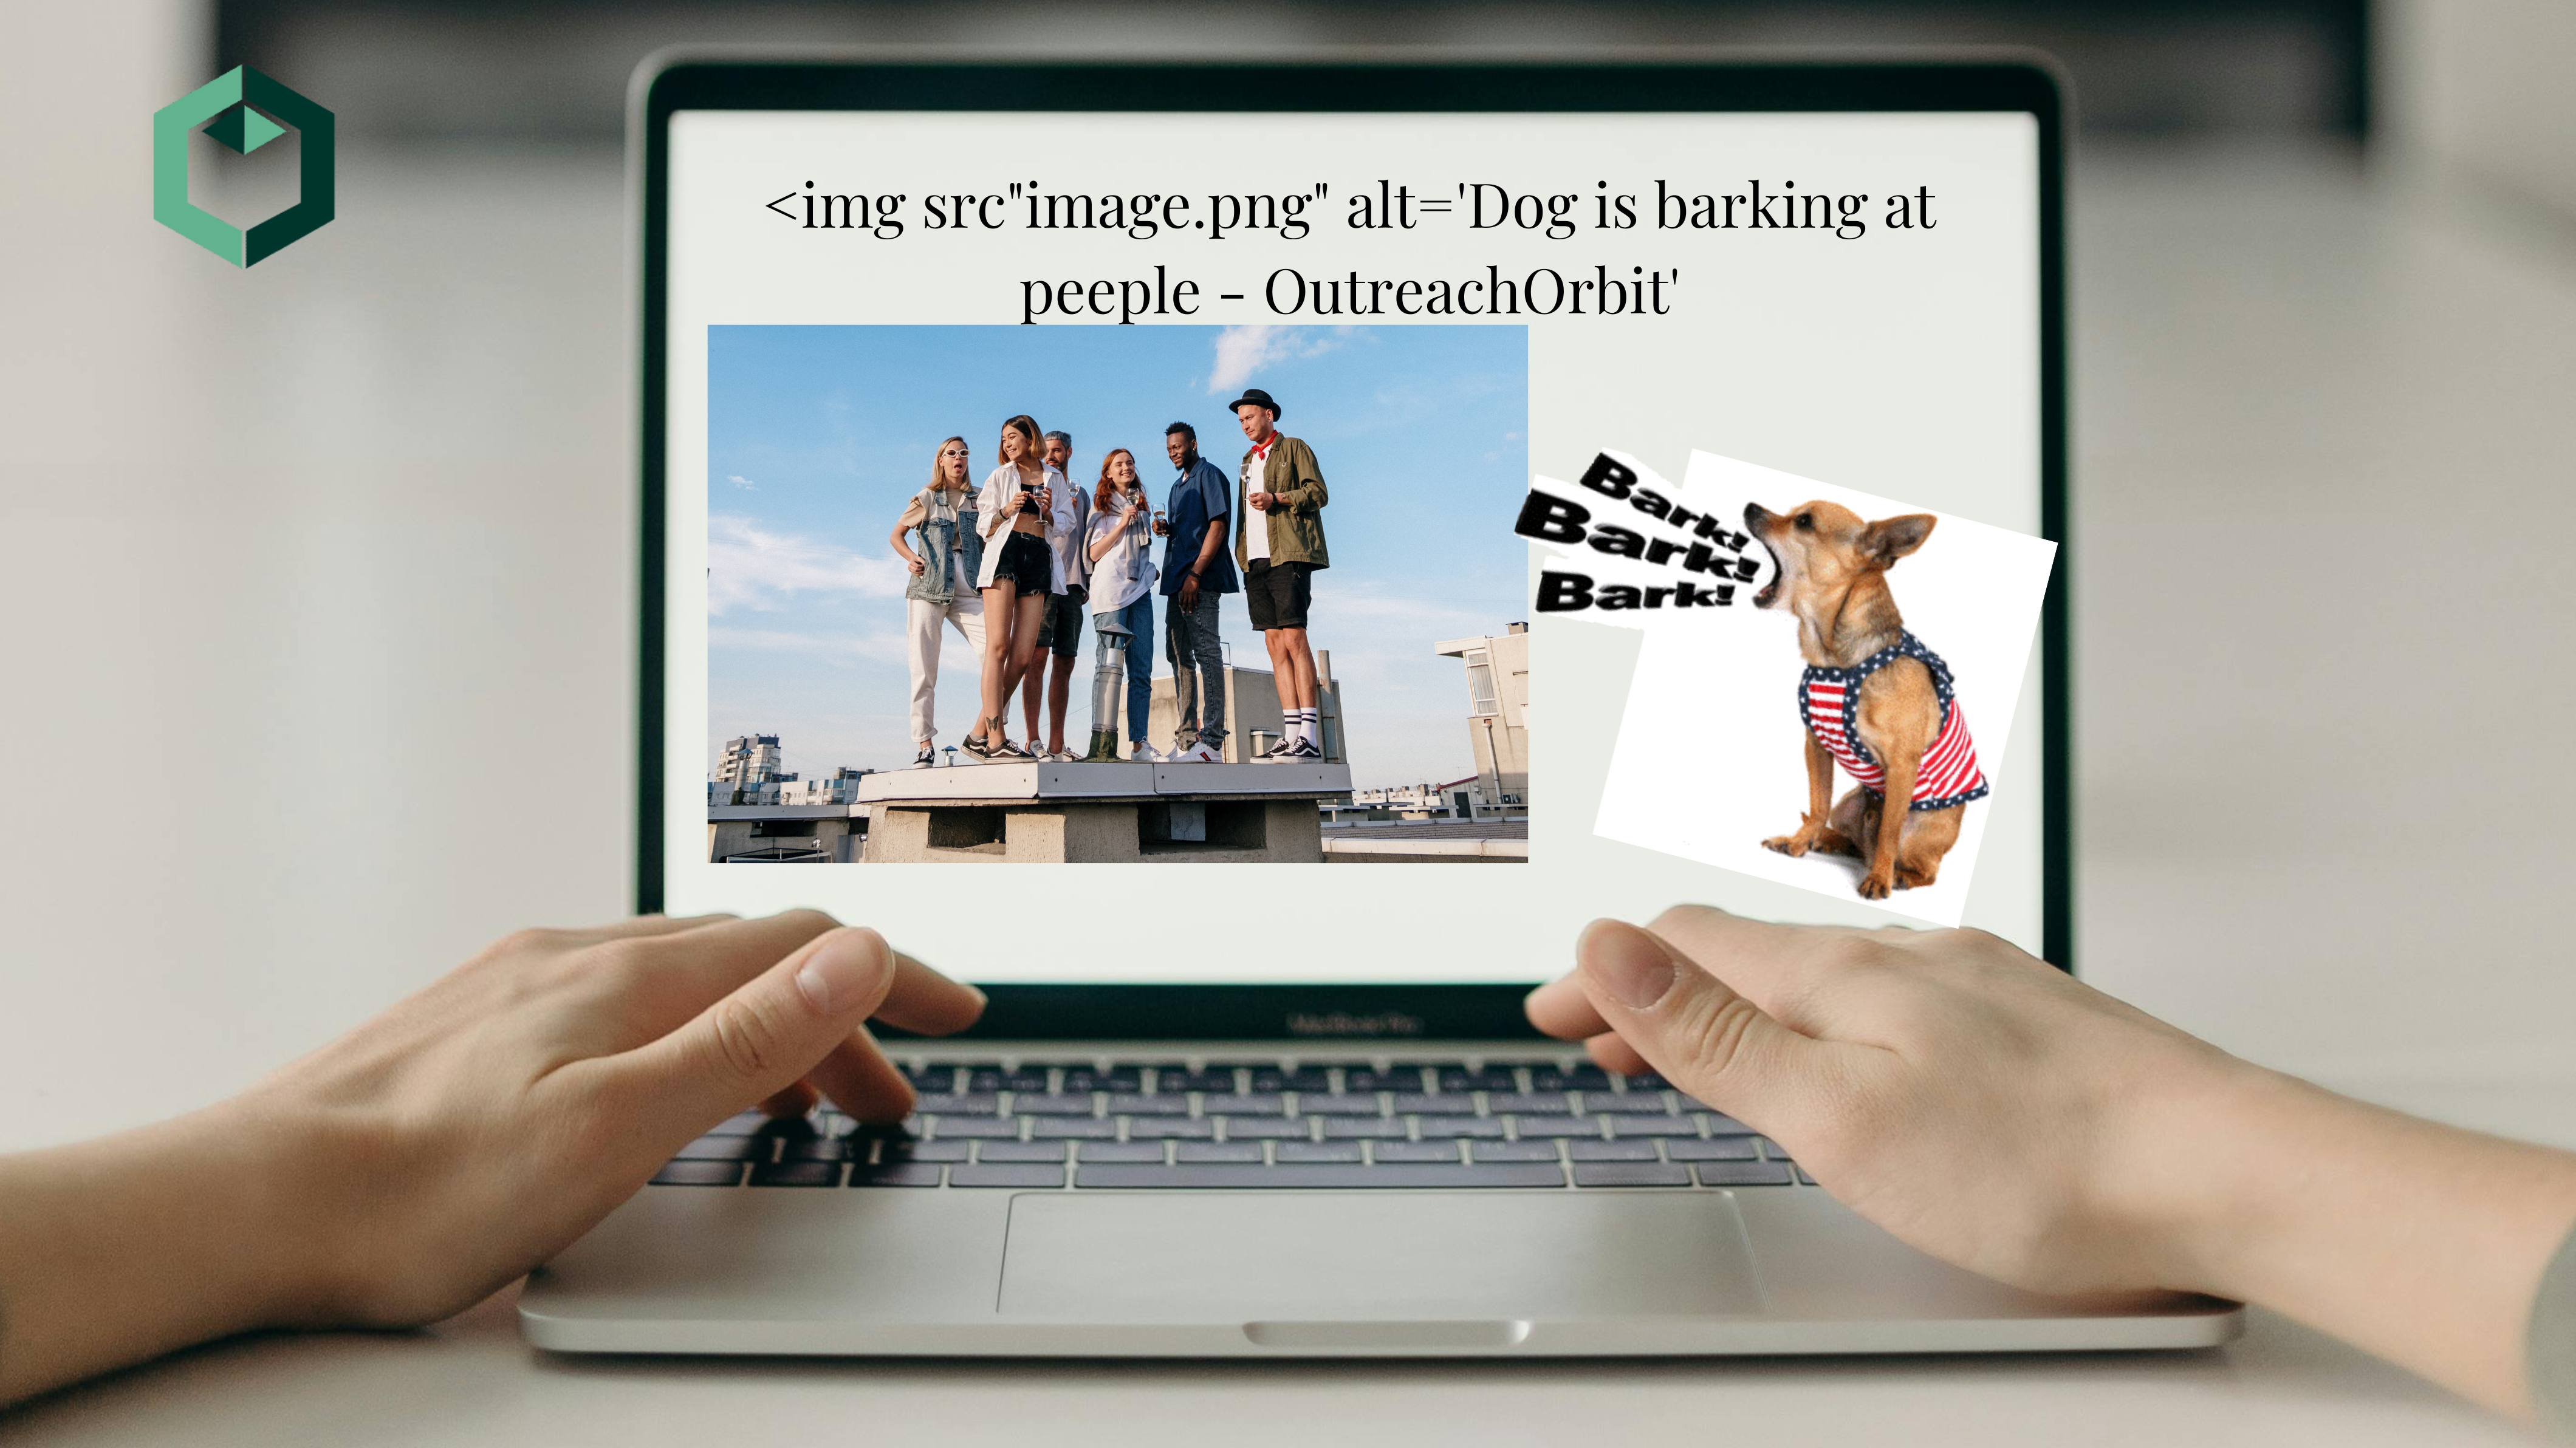 A dog is barking at people - OutreachOrbit